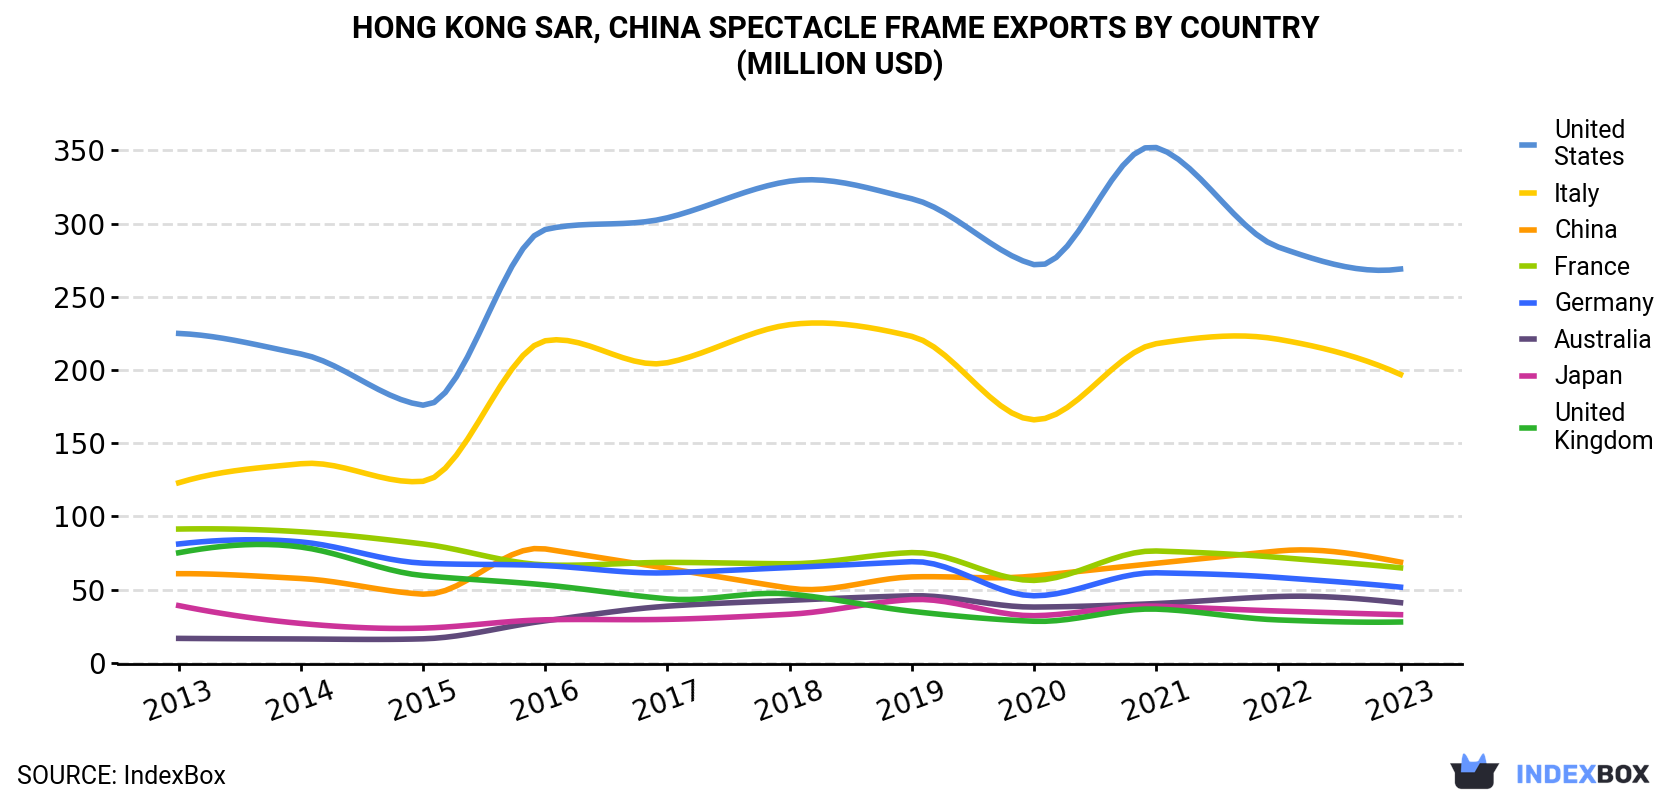 Hong Kong Spectacle Frame Exports By Country (Million USD)